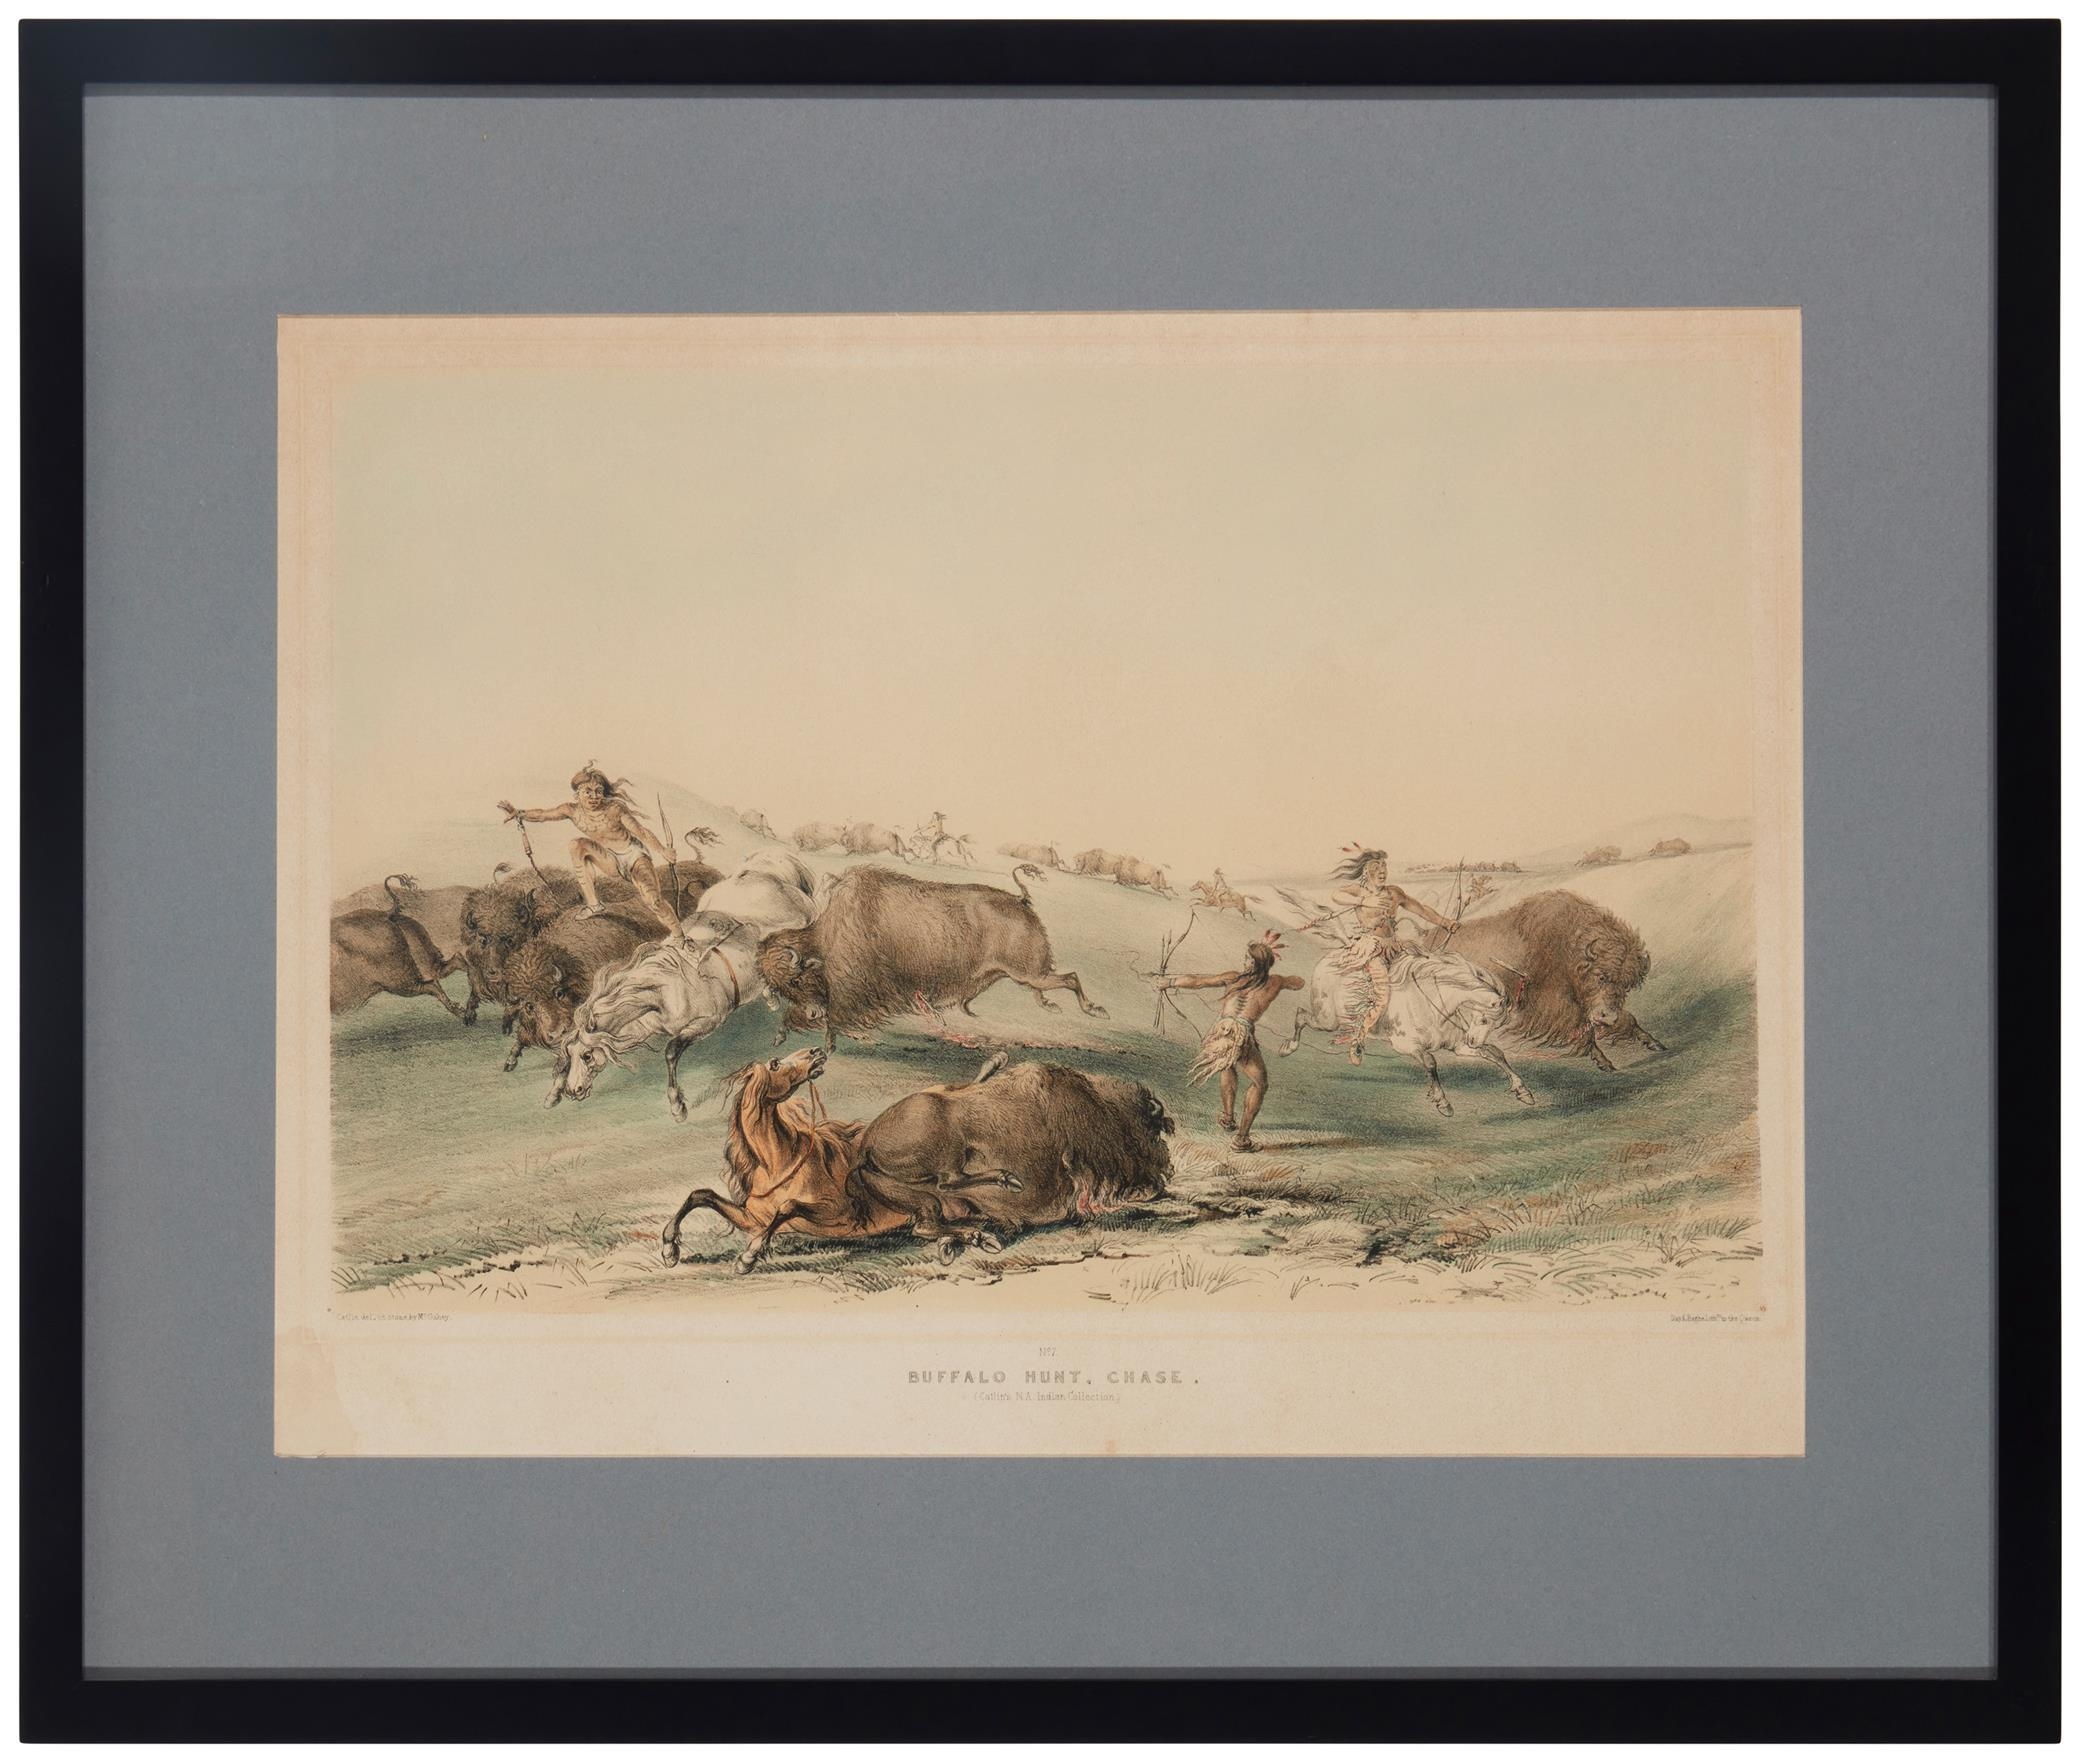 George Catlin Buffalo Hunt, plate 7 from Catlin's North American